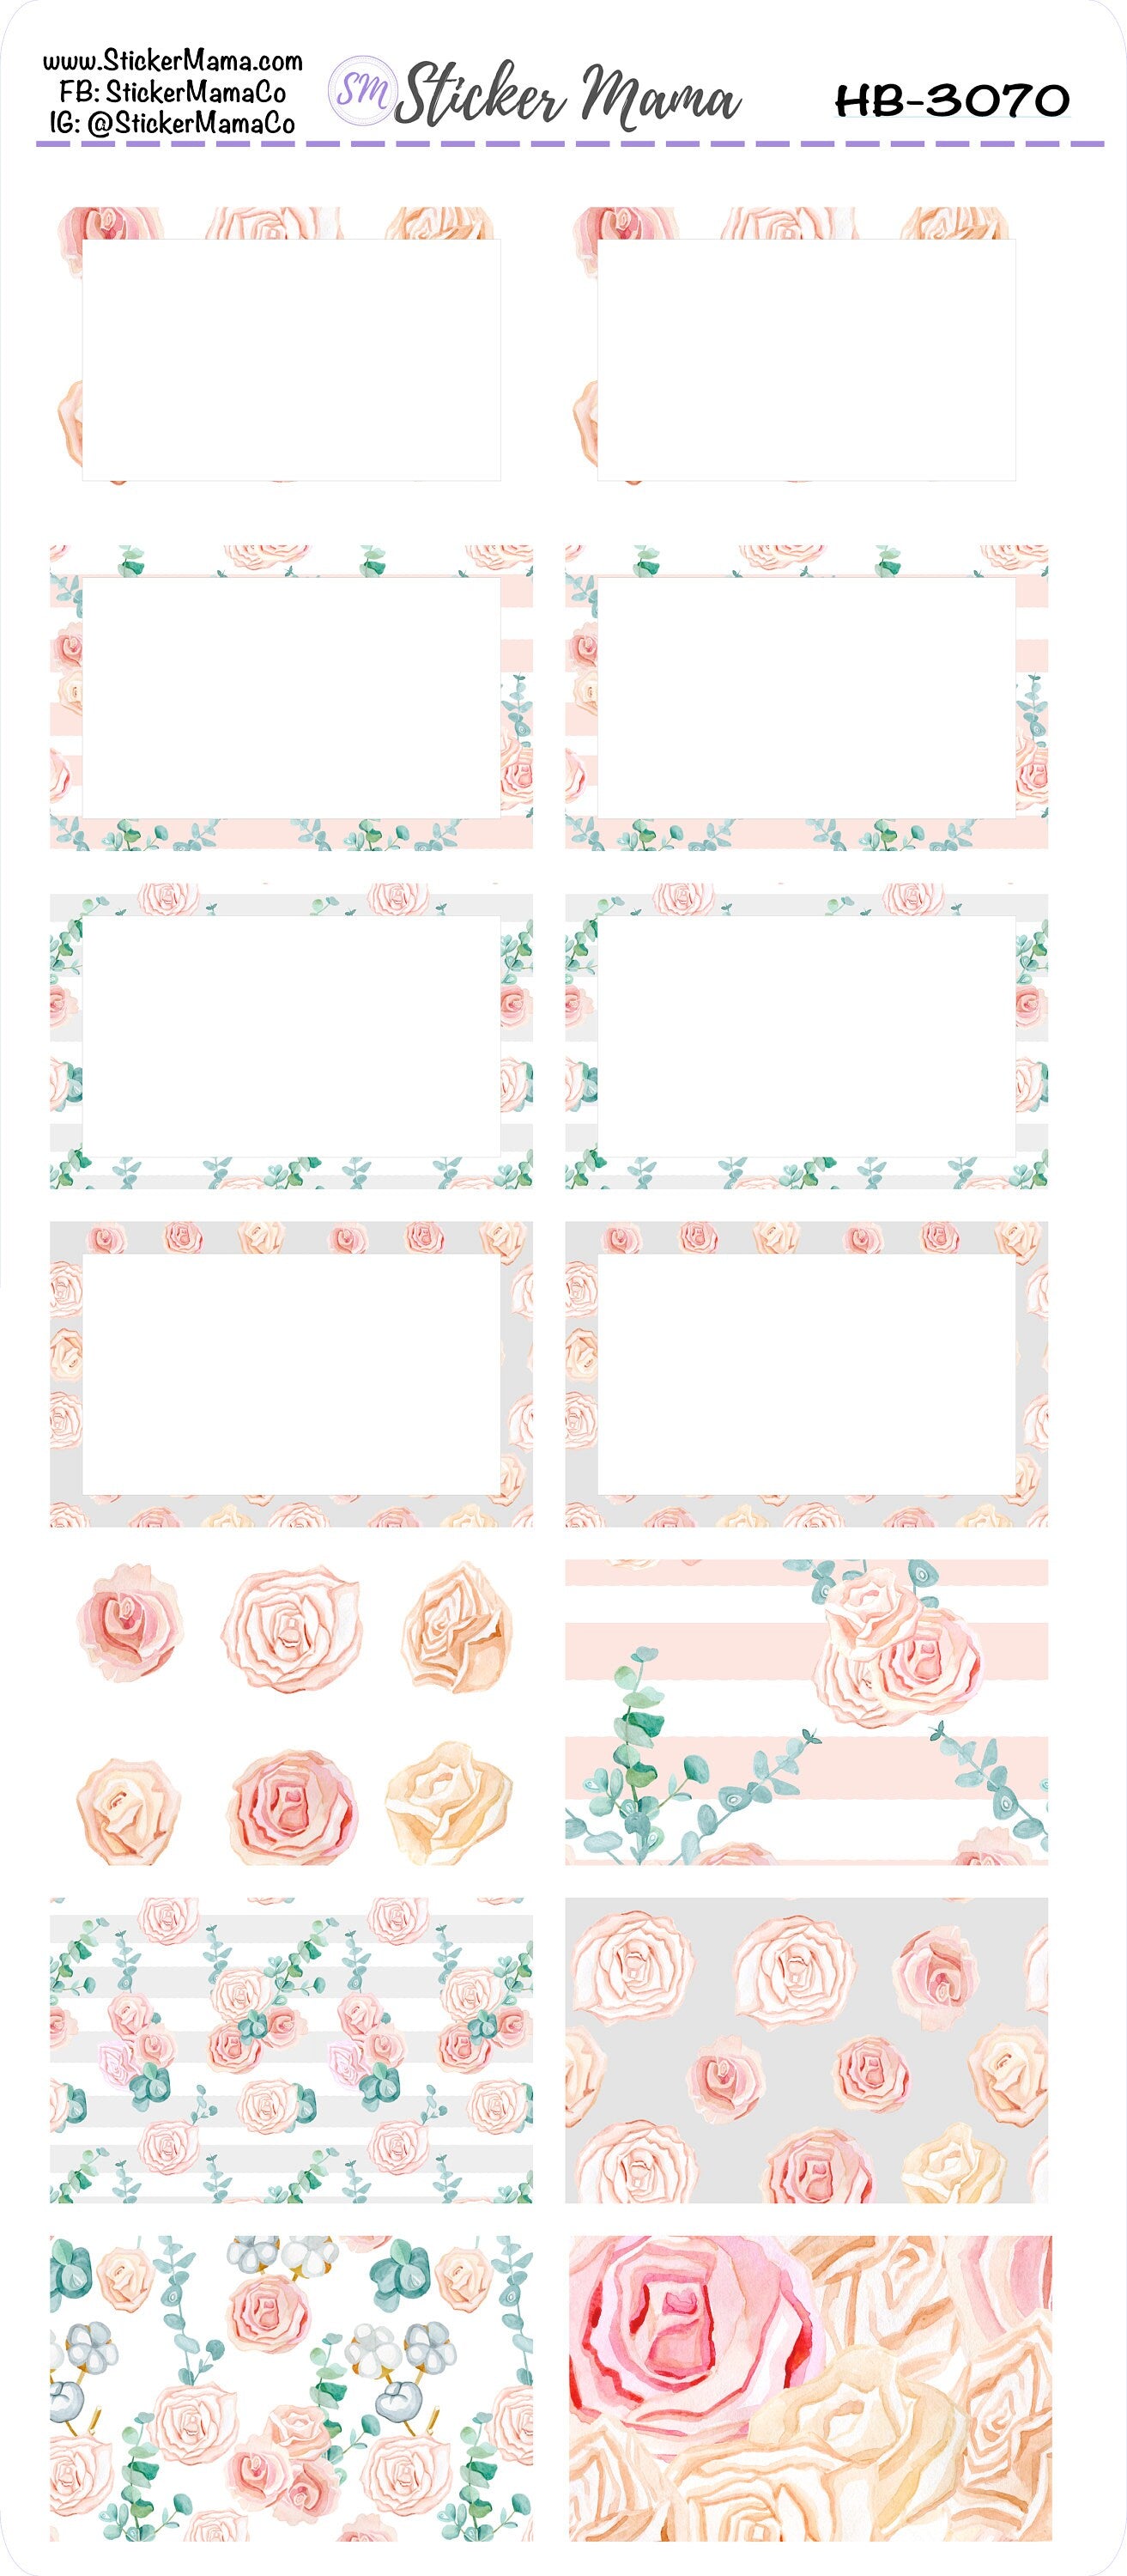 BL-3070 - HB-3070 BASIC Label Stickers - Romantic Flowers - Half Boxes - Planner Stickers - Full Box for Planners